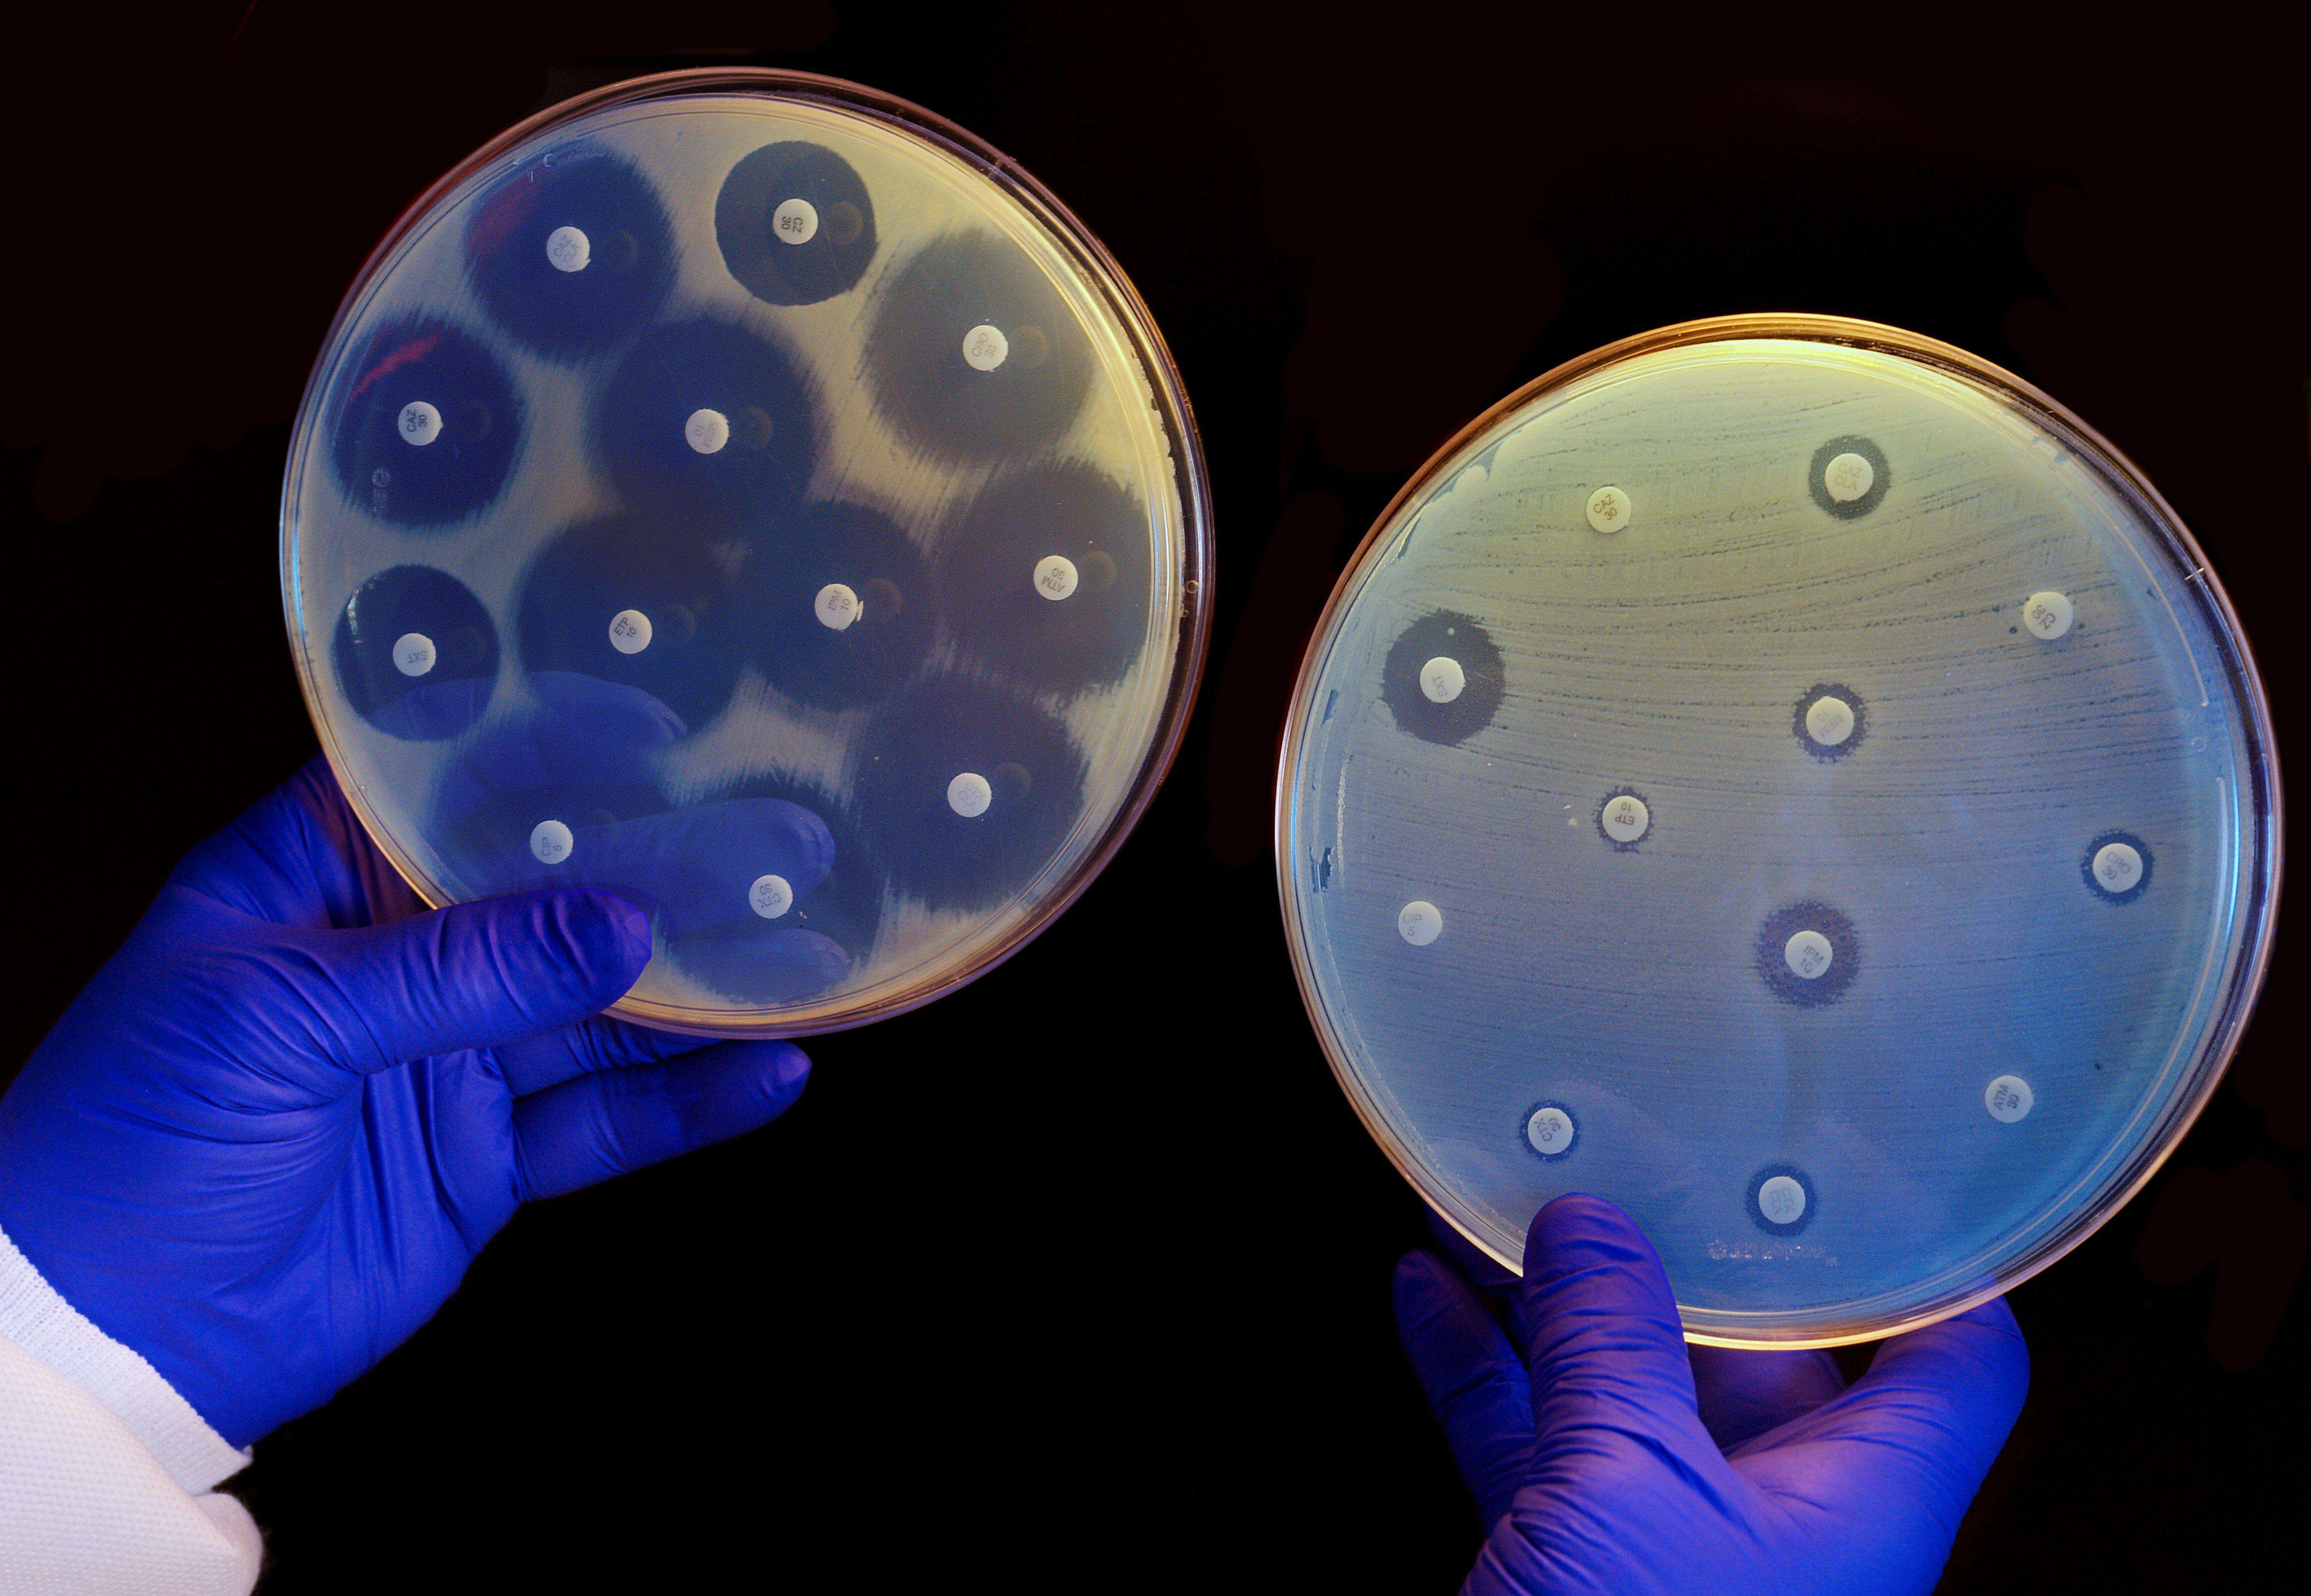 The plate on the left contains bacteria that are susceptible to antibiotics while the one on the right contains antibiotic-resistant bacteria. Picture: Alamy